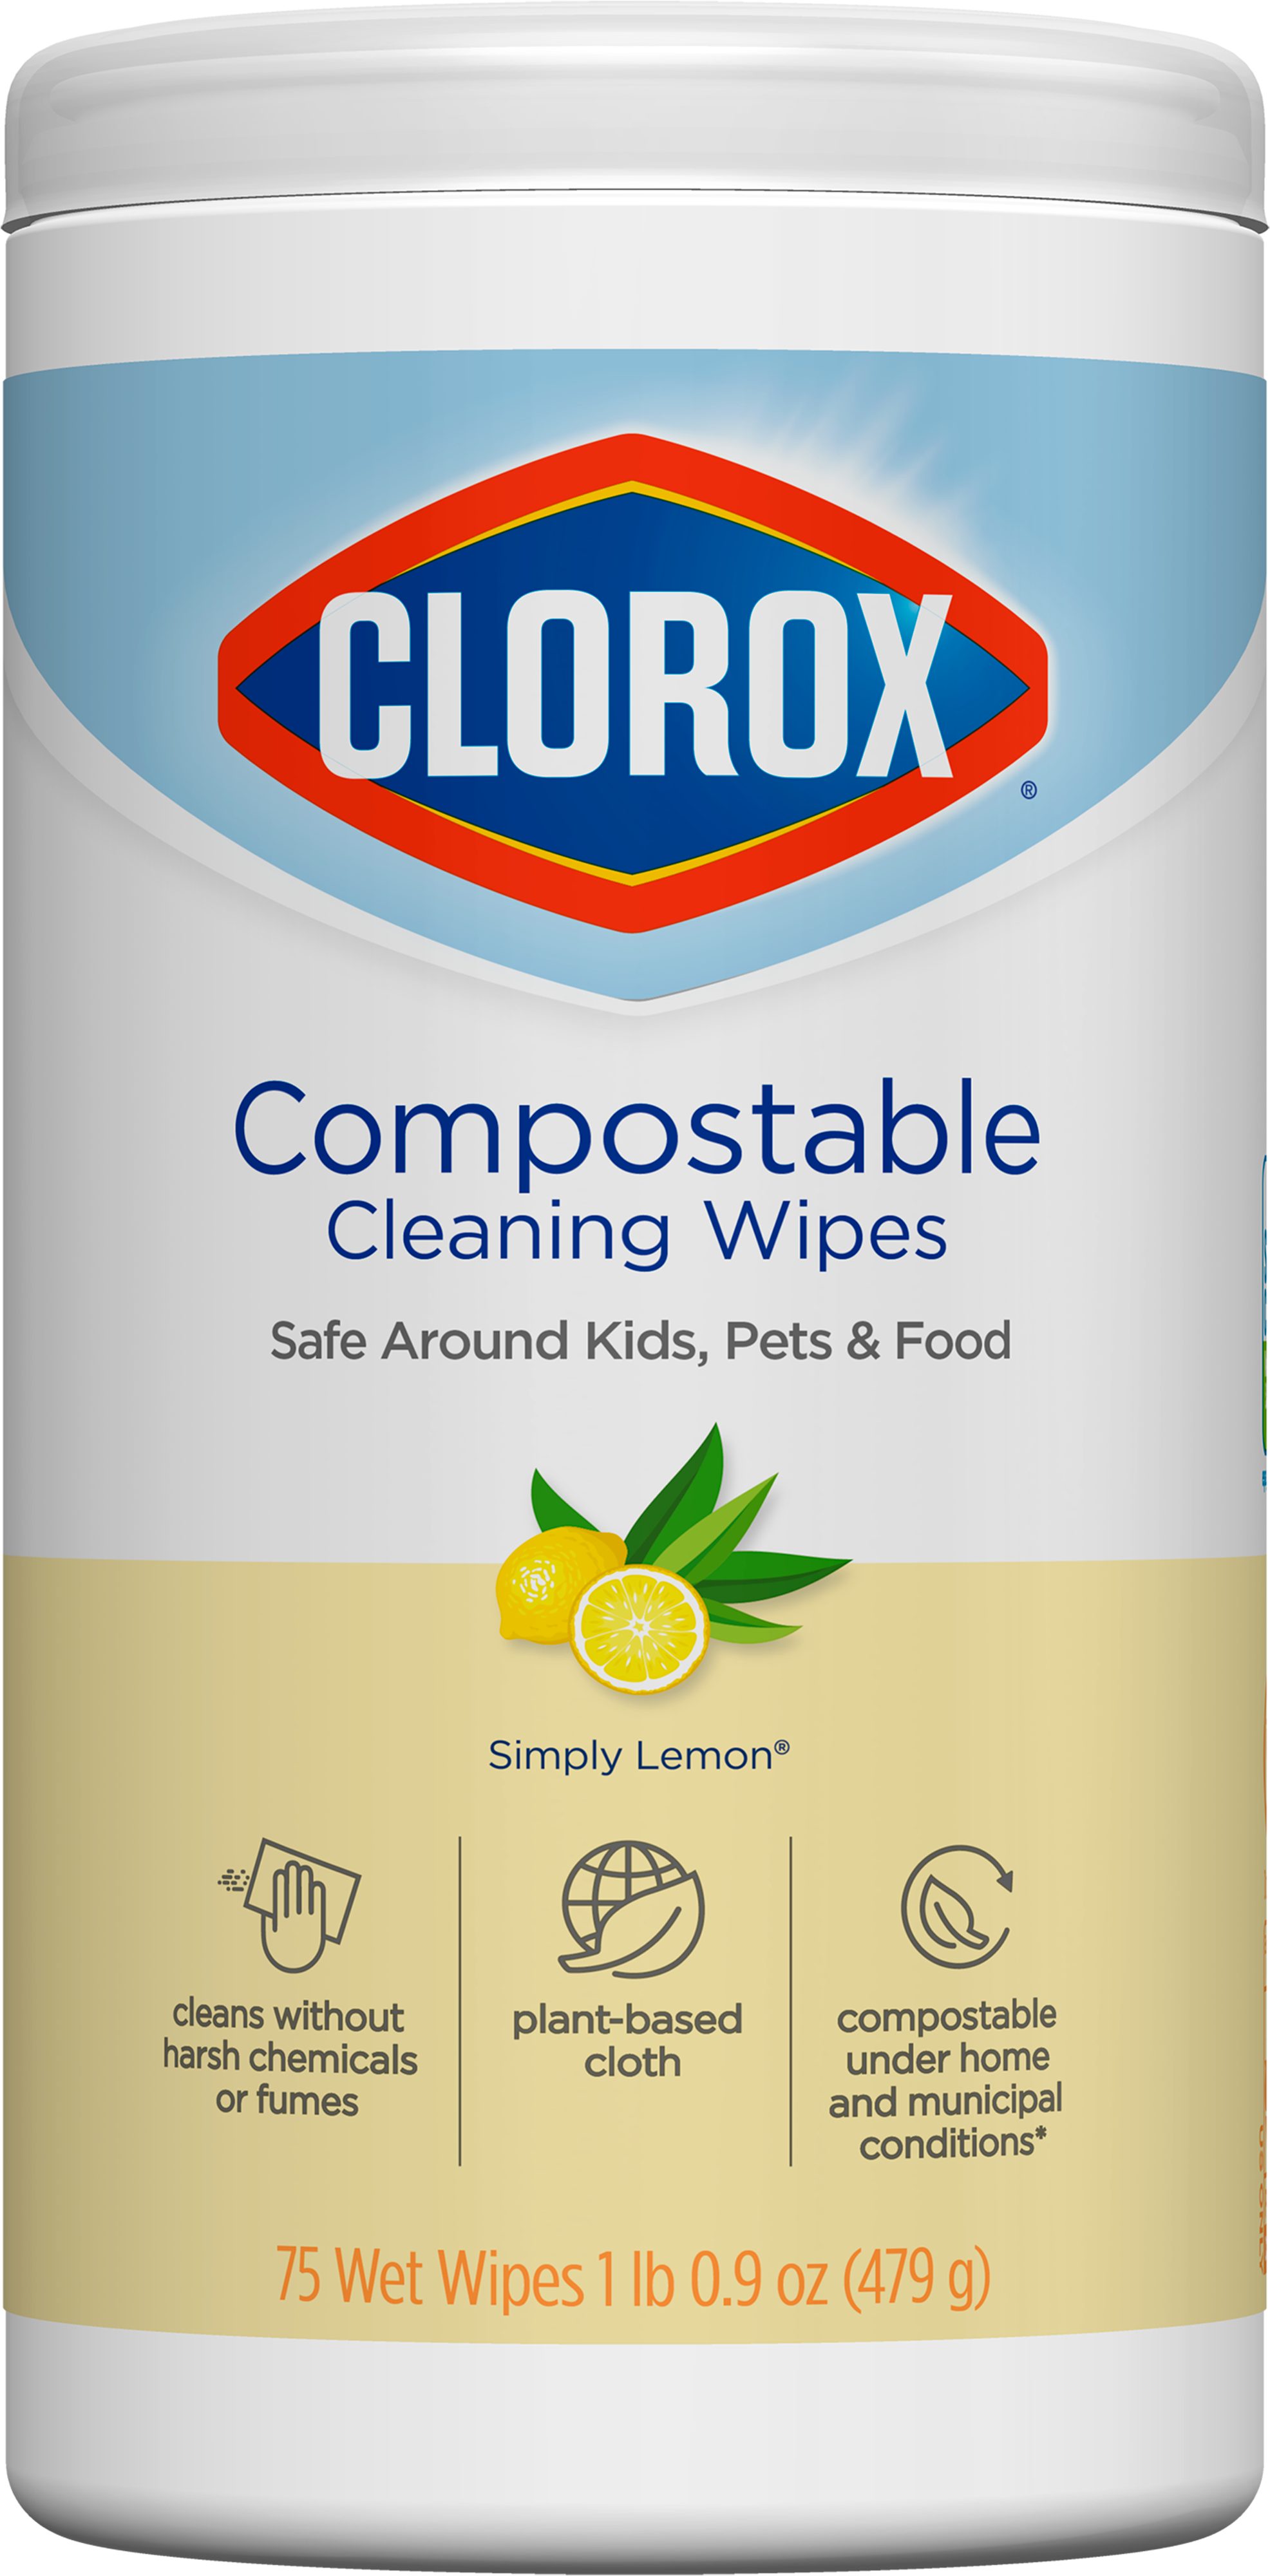 Biodegradable Compostable cleaning products